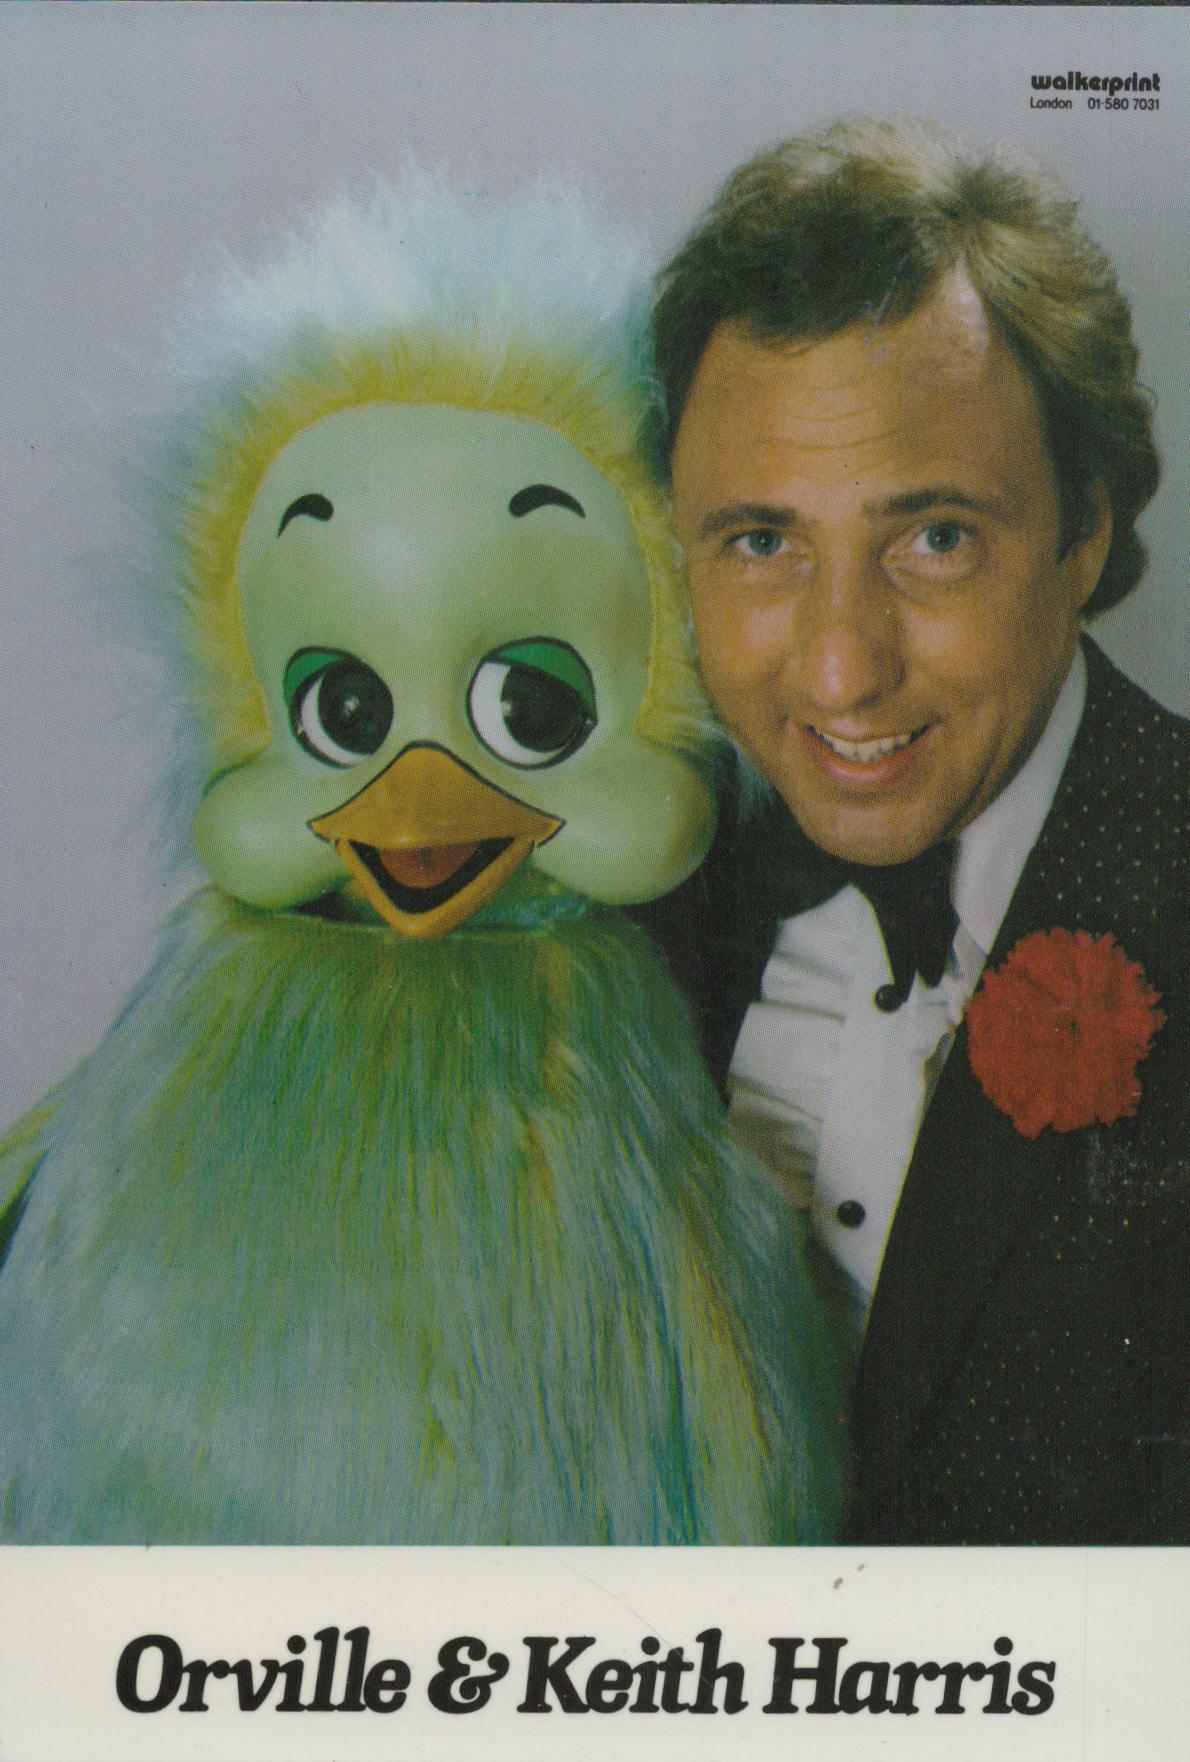 Keith Harris signed on back of Promo. Colour Photo. 6x4 Inch. Was an English ventriloquist, best